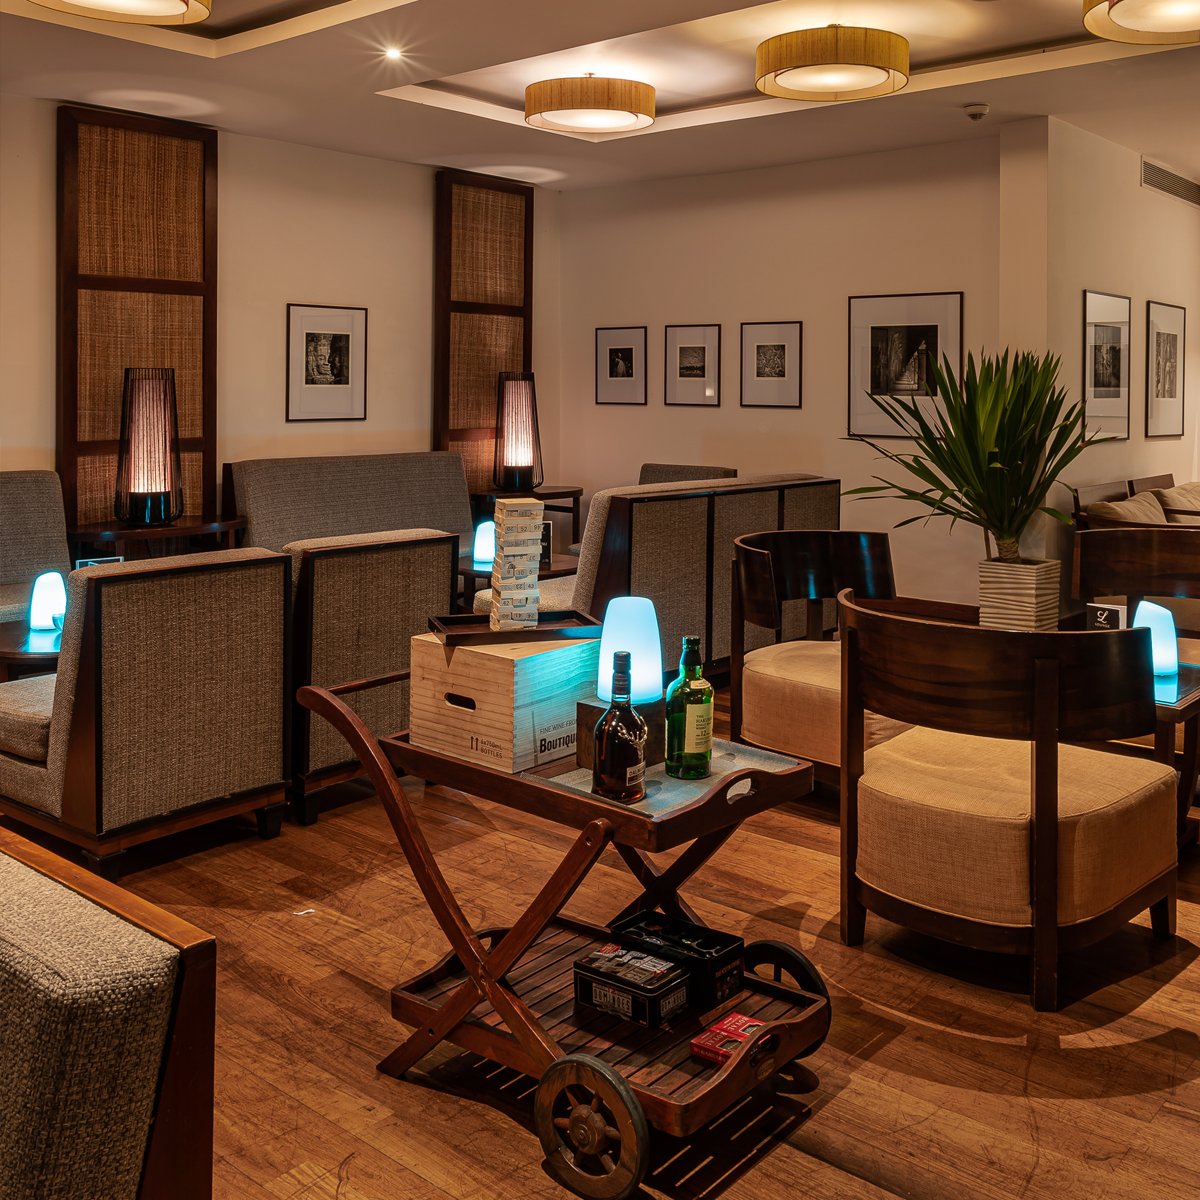 Unwind after a day of adventure at Road6 Bar & Lounge of Anantara Angkor Resort. Indulge in our crafted cocktails for a truly unique taste experience.🍸

View more >> mhg.to/a5c3w
T +855 (0) 63 966 788 
E reserve.angkor@anantara.com

#Road6Bar #AnantaraAngkor #SiemReap